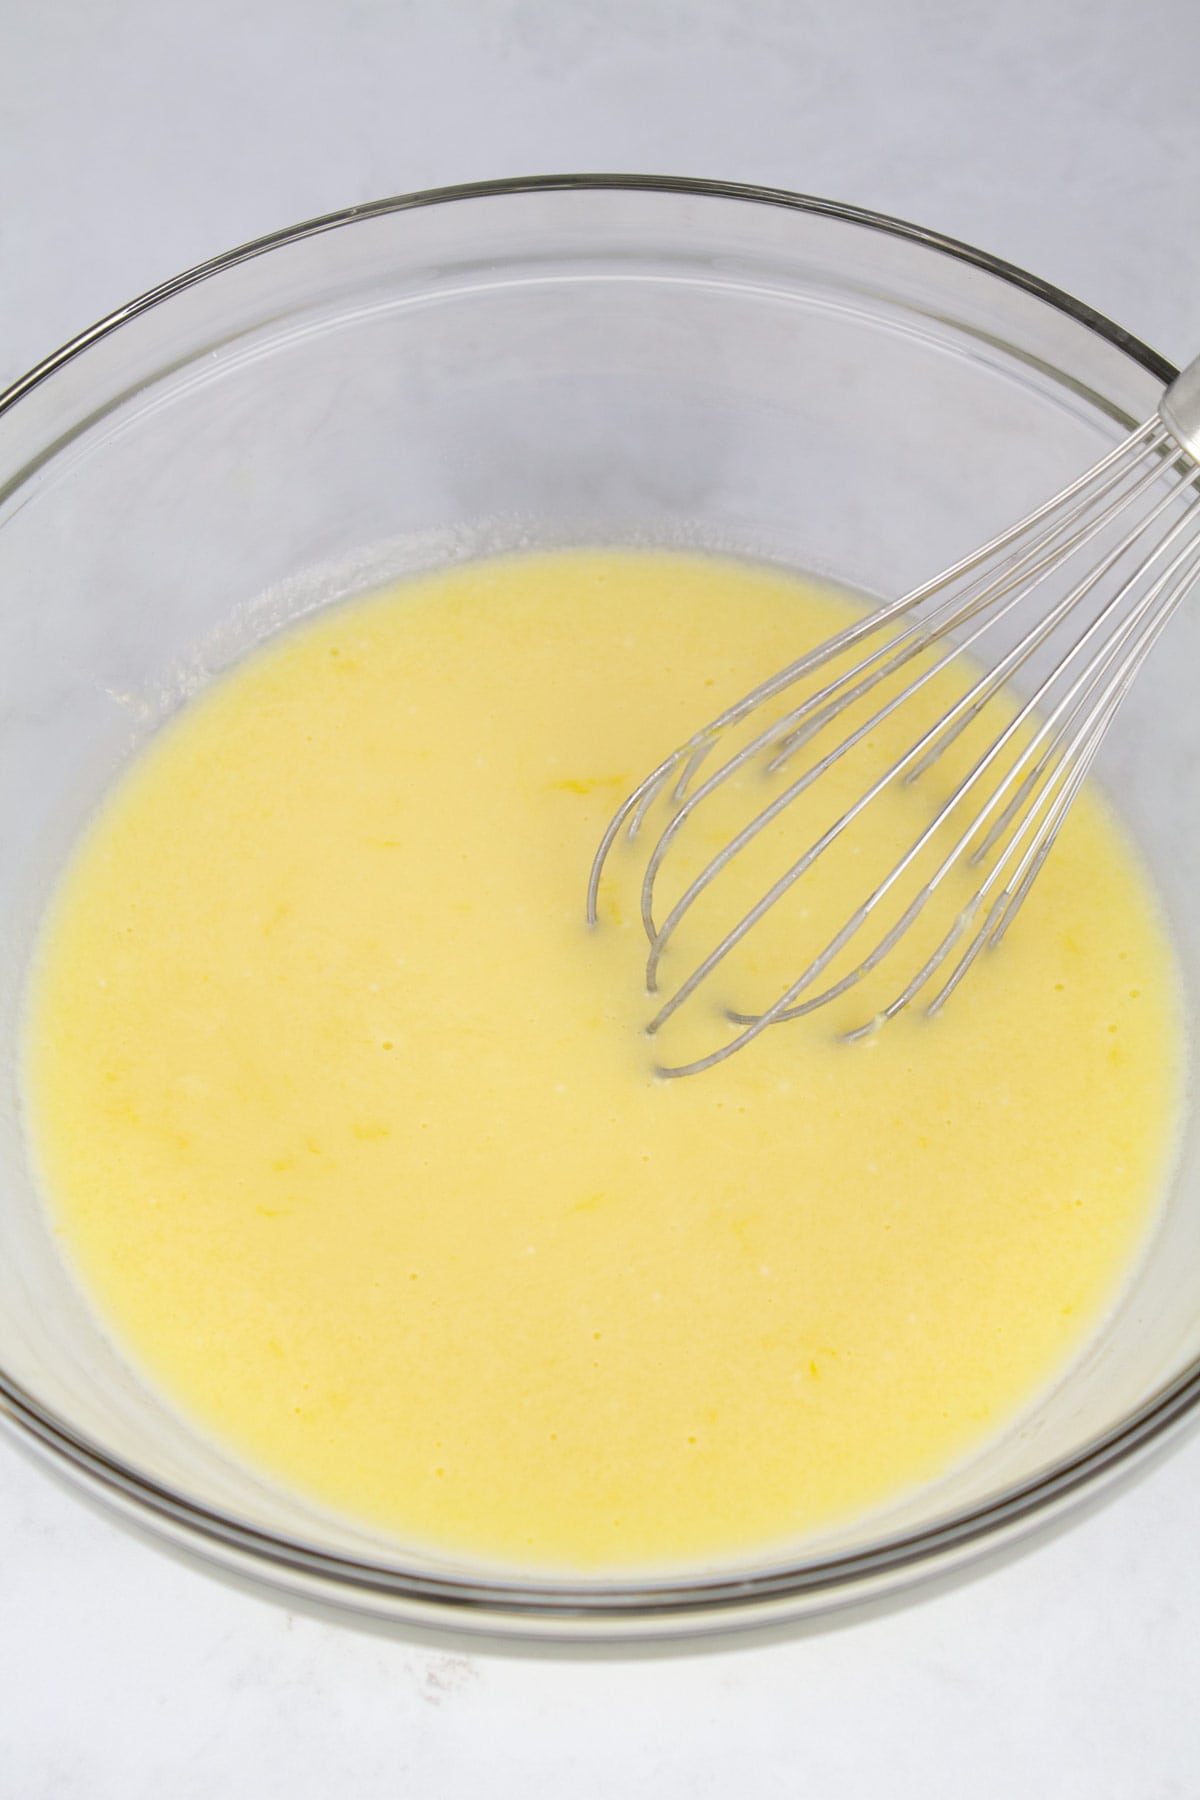 Wet ingredients whisked together in a large glass bowl with the whisk resting in the back of the bowl.